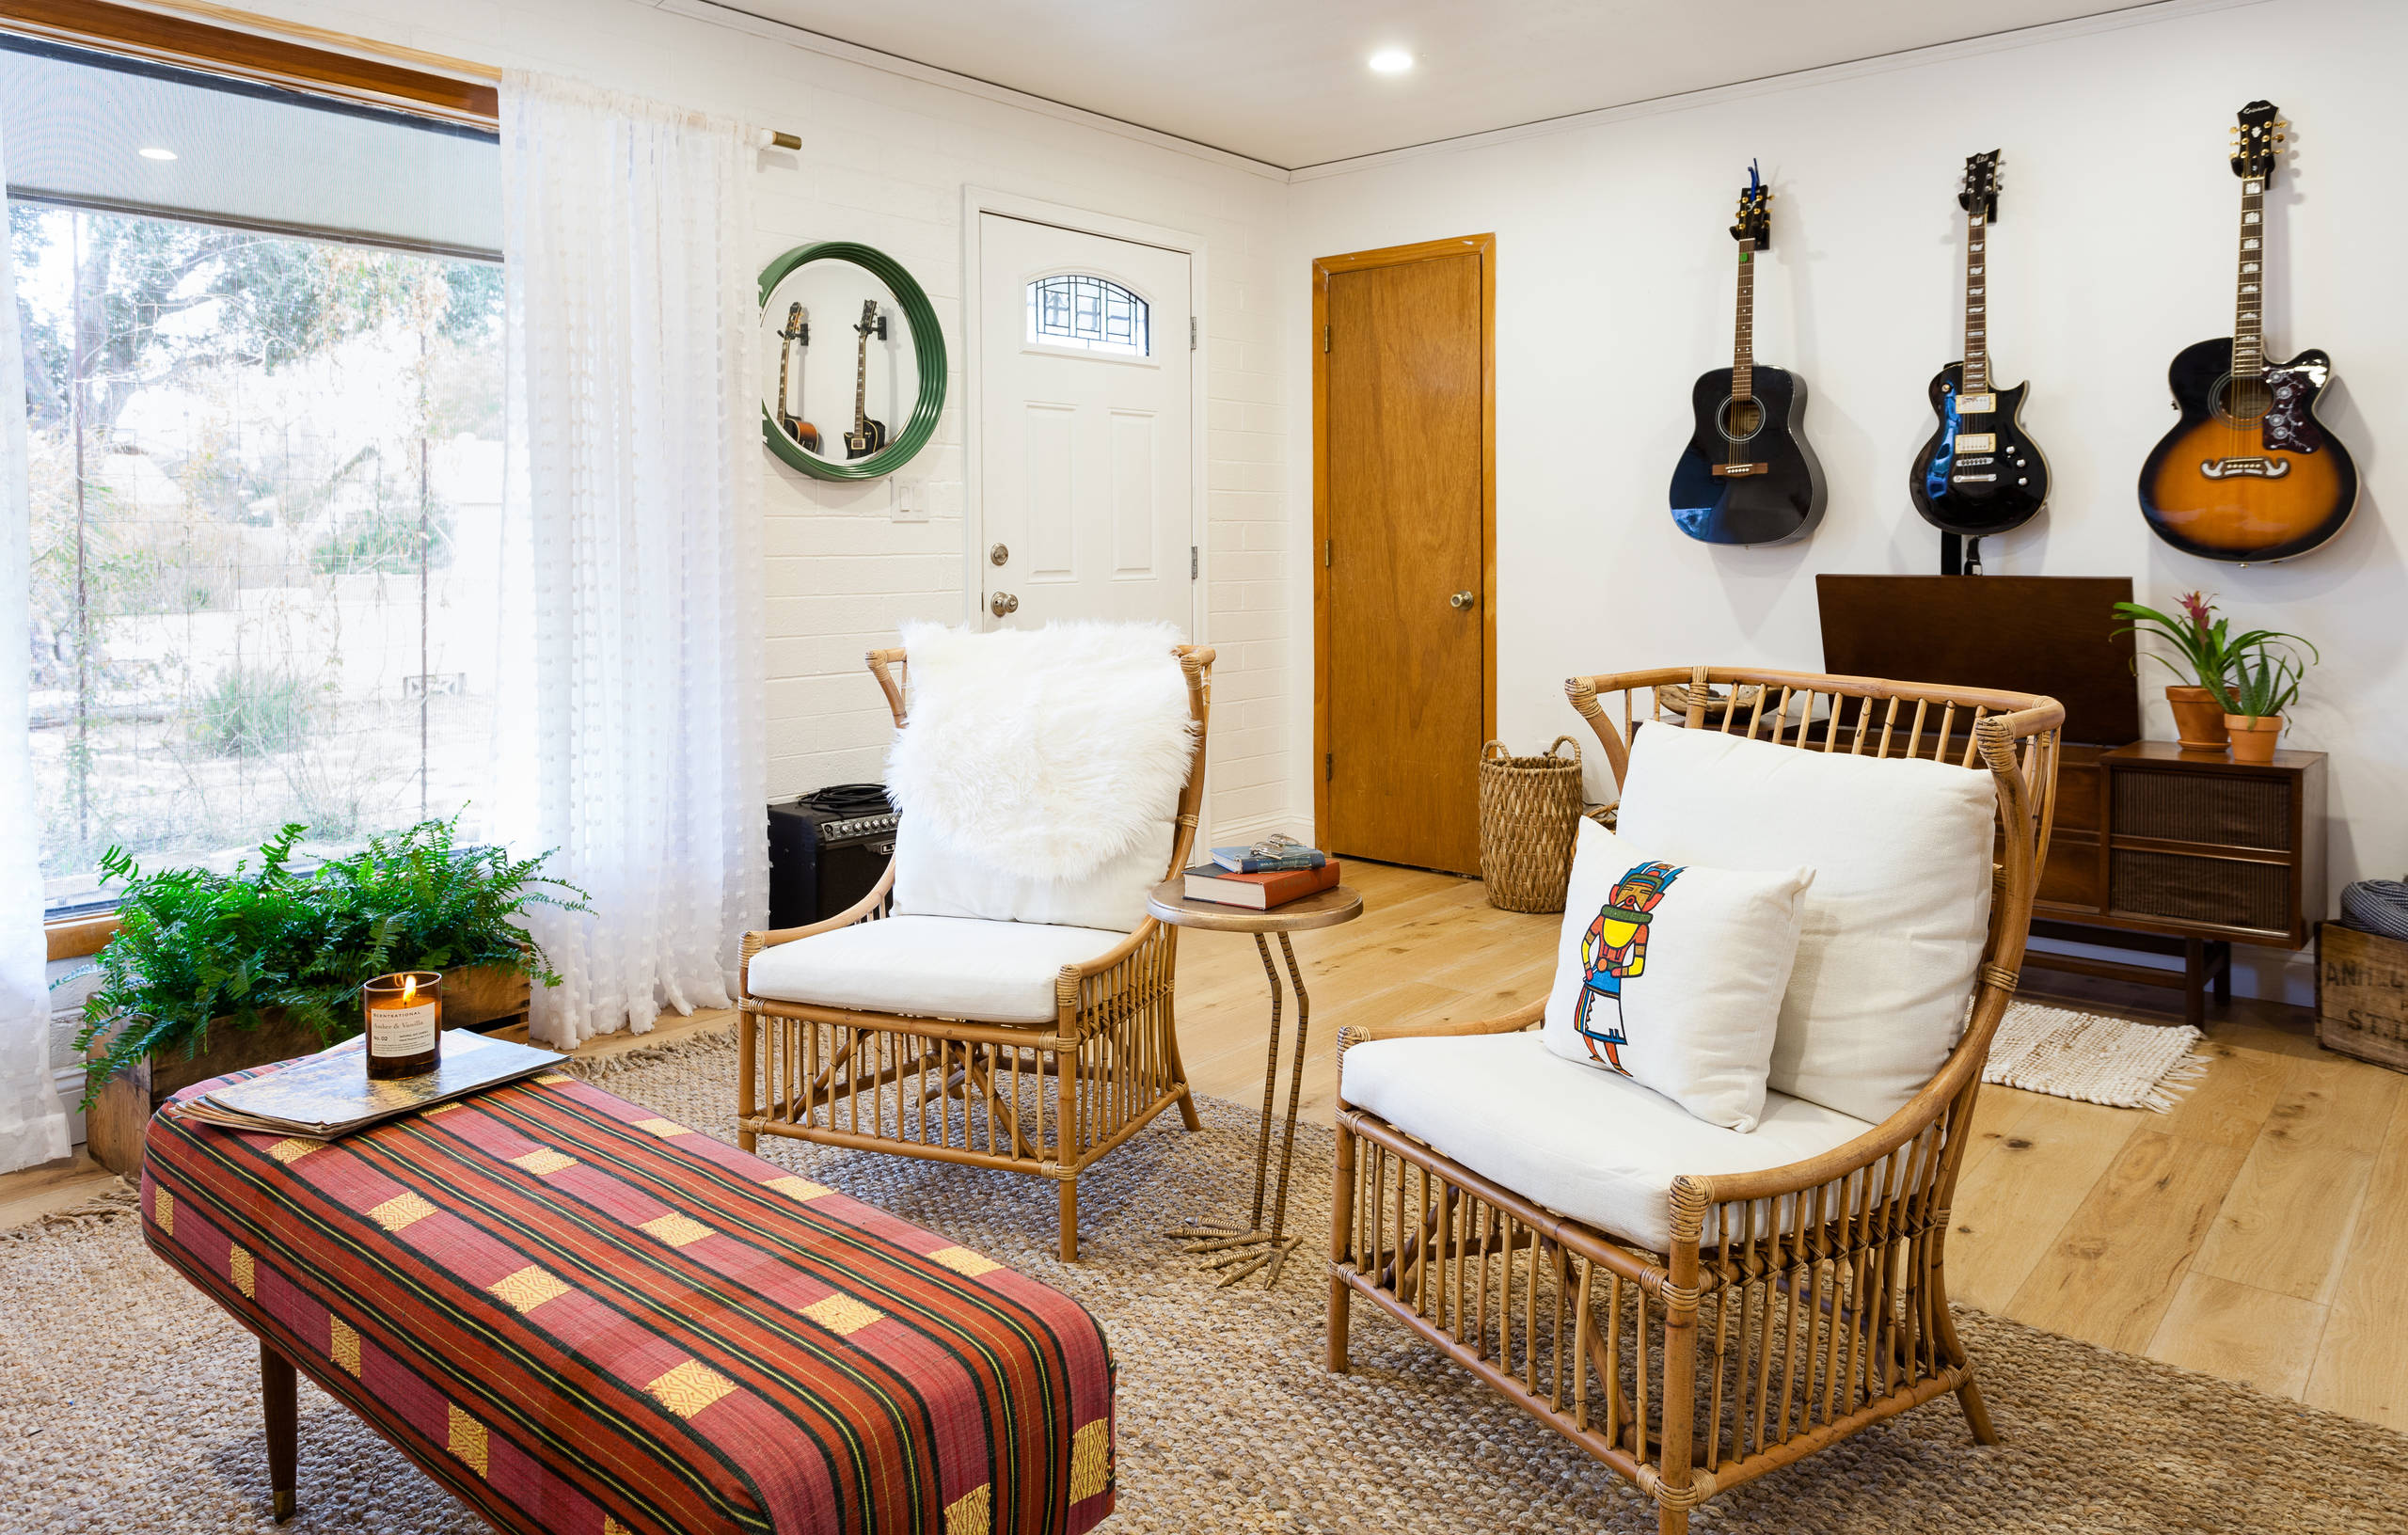 Bohemian Midcentury in the Southwest - Eclectic - Living Room - Phoenix -  by Mackenzie Collier Interiors | Houzz